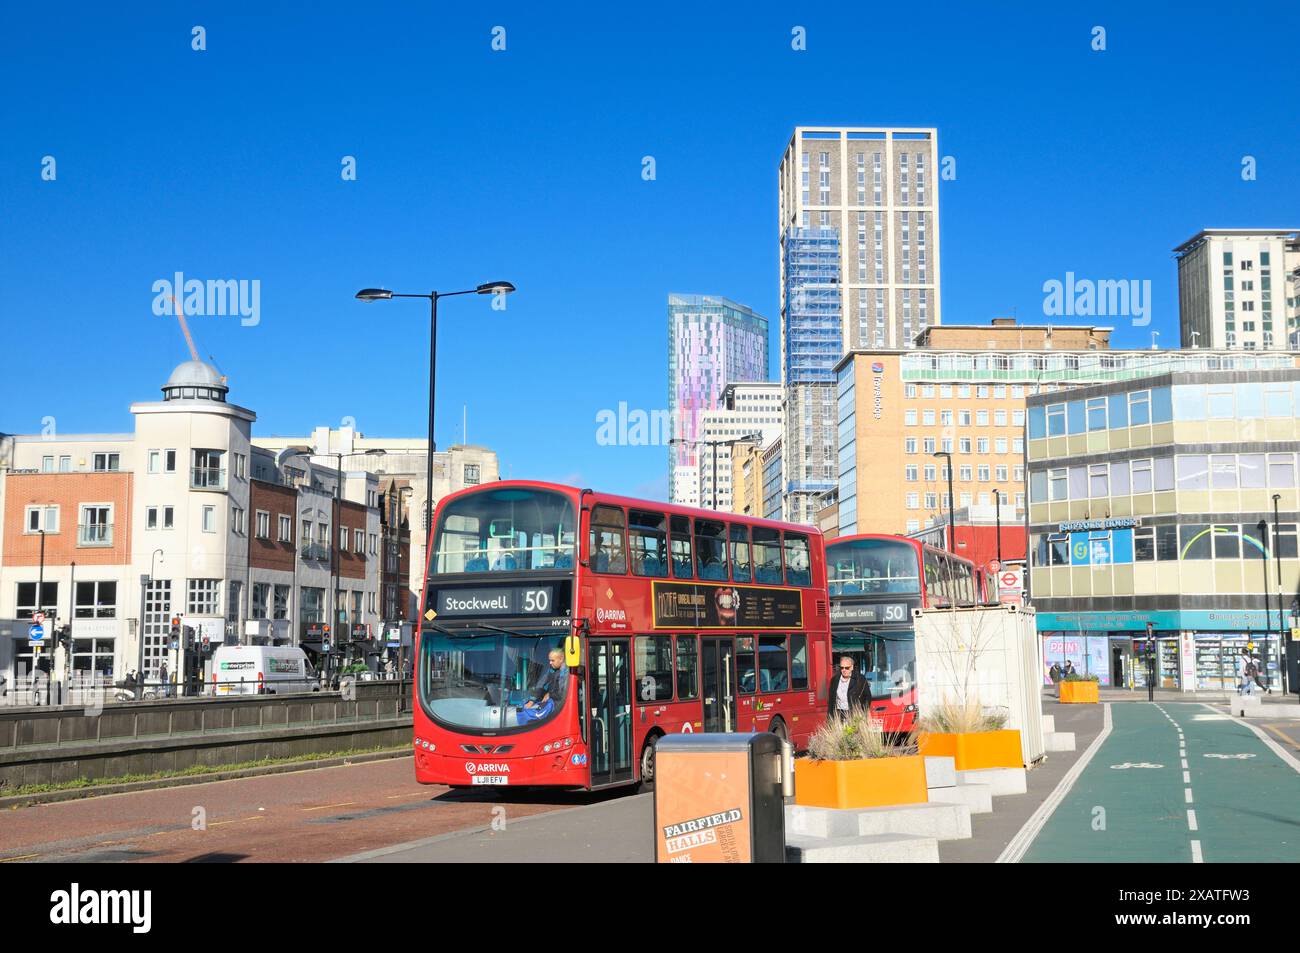 Red double decker buses outside Fairfield Halls on Park Lane in Croydon town centre looking towards buildings on Wellesley Road, England UK. Transport Stock Photo